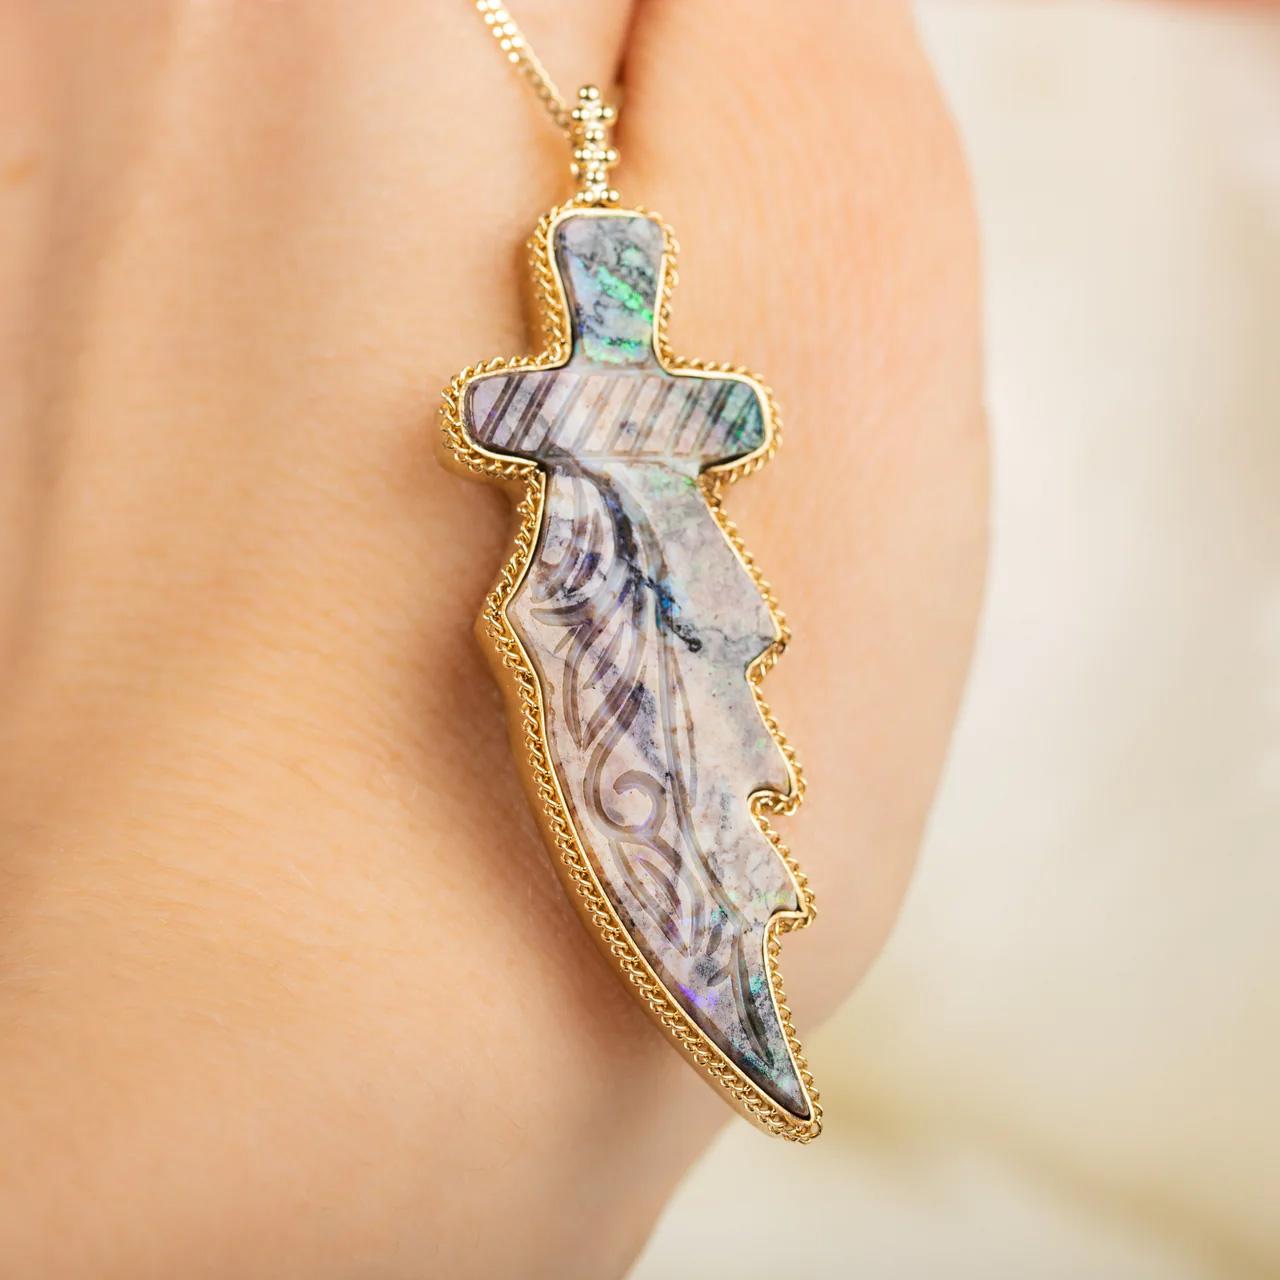 This Andamooka Opal has been expertly carved into the shape of an abstract dagger. The stone’s vibrant colorway of dark reddish purple over cream with clouds of orange and brown punctuated with flashes of electric green makes this Andamooka Opal